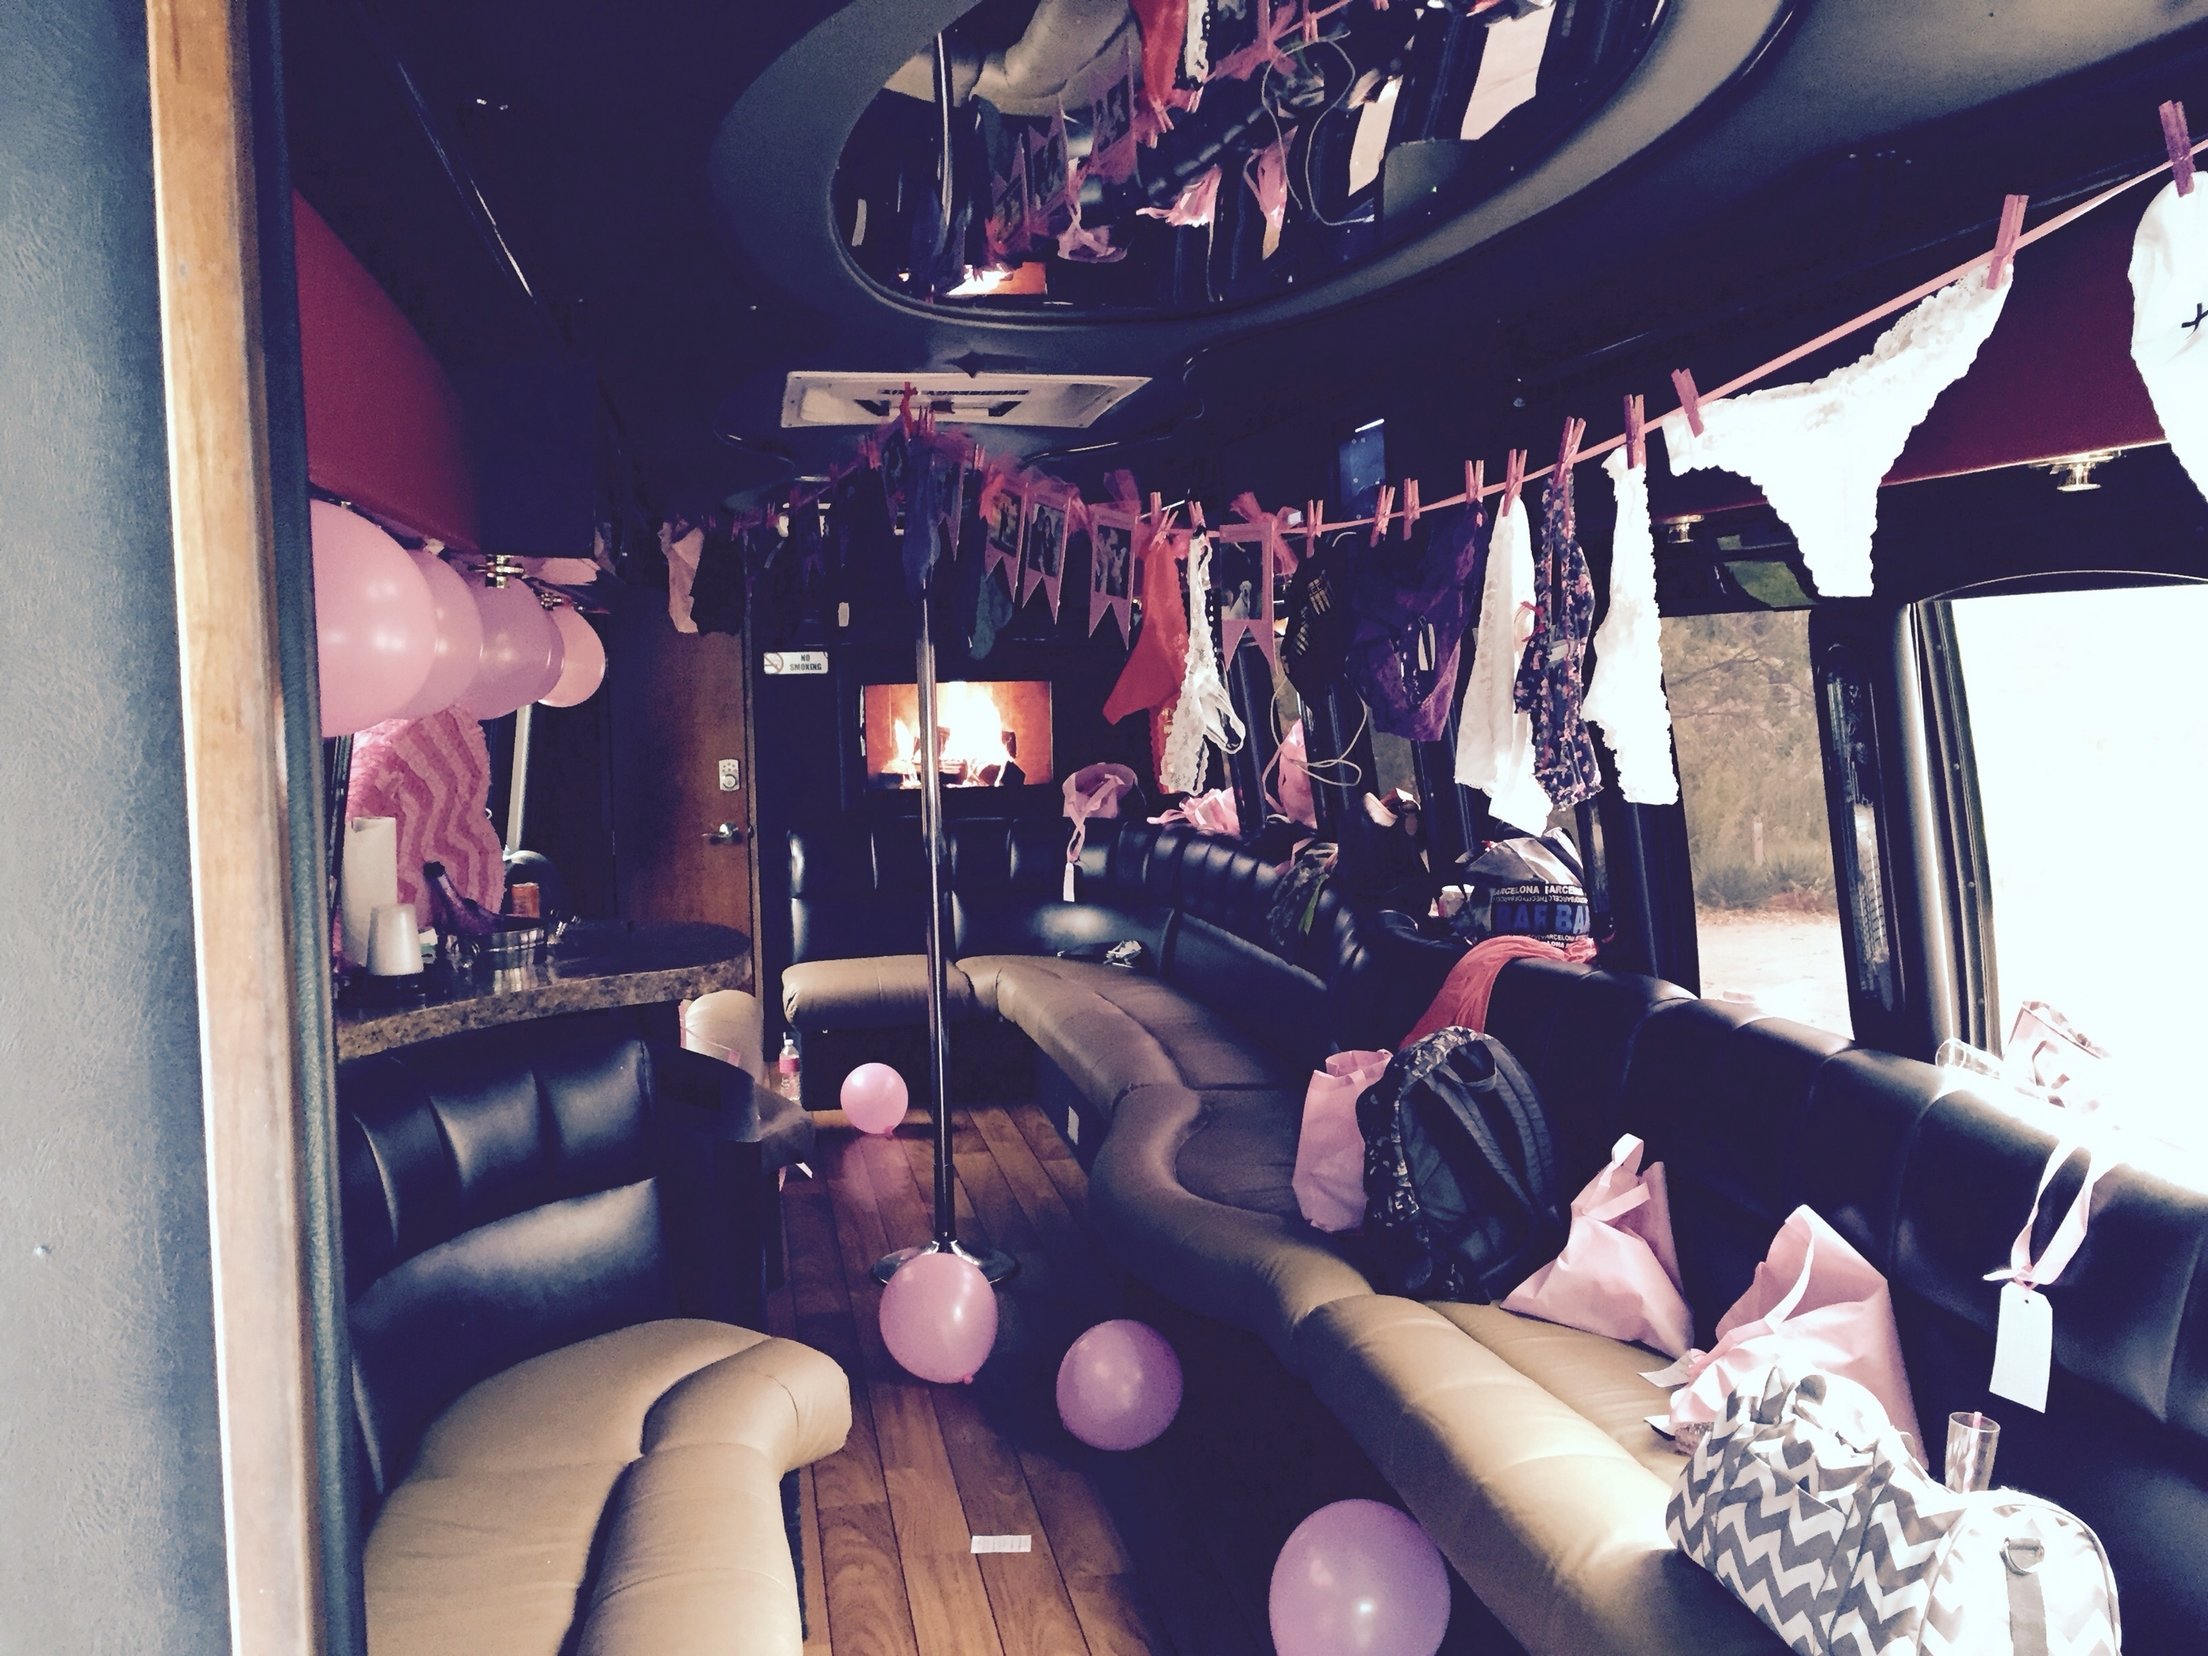 10 Stunning Bachelorette Party Ideas In Michigan michigan wine tour with your bachelorette group limos alive party 1 2022